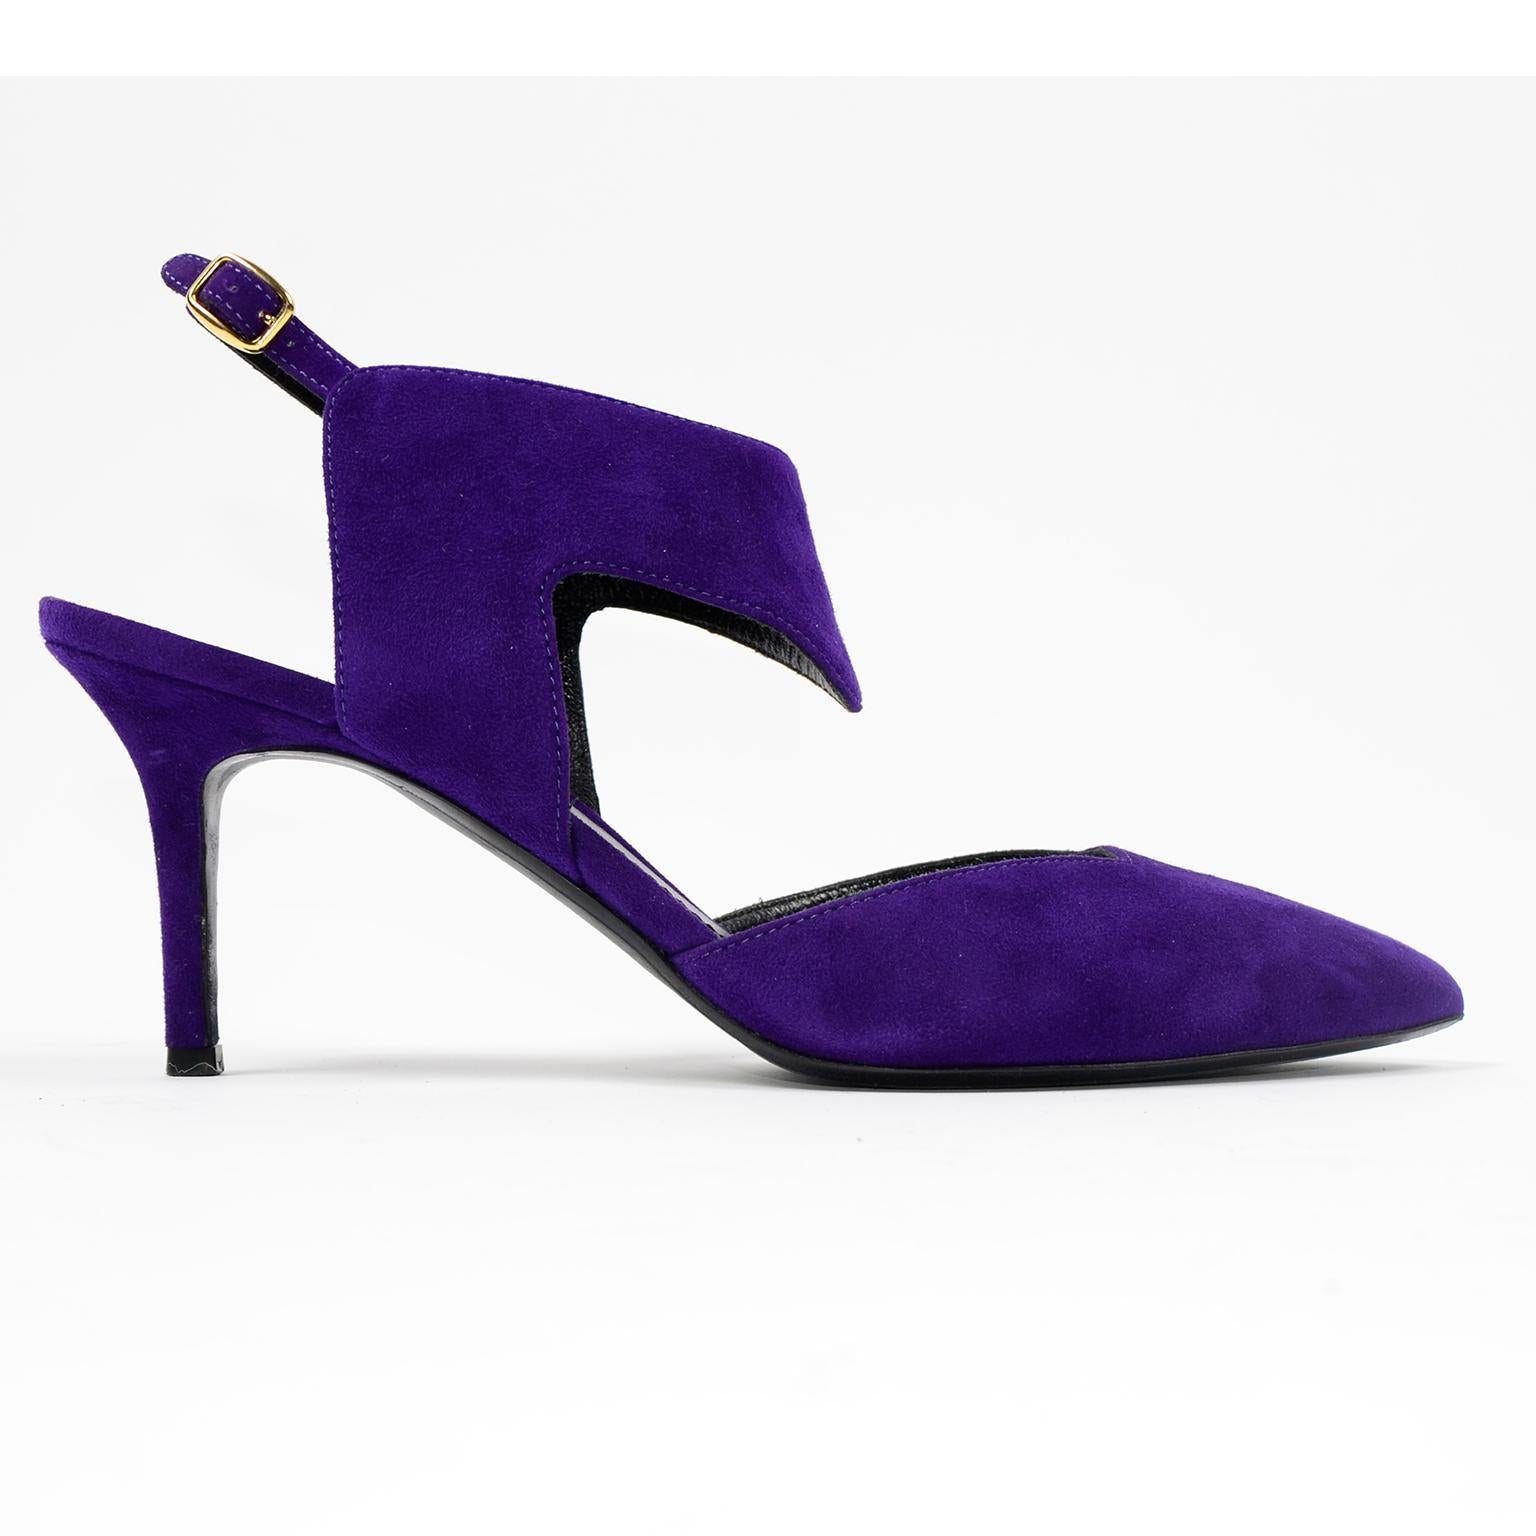 Nicholas Kirkwood Purple Suede Slingback Pointed Toe Shoes With Heels In Excellent Condition For Sale In Portland, OR